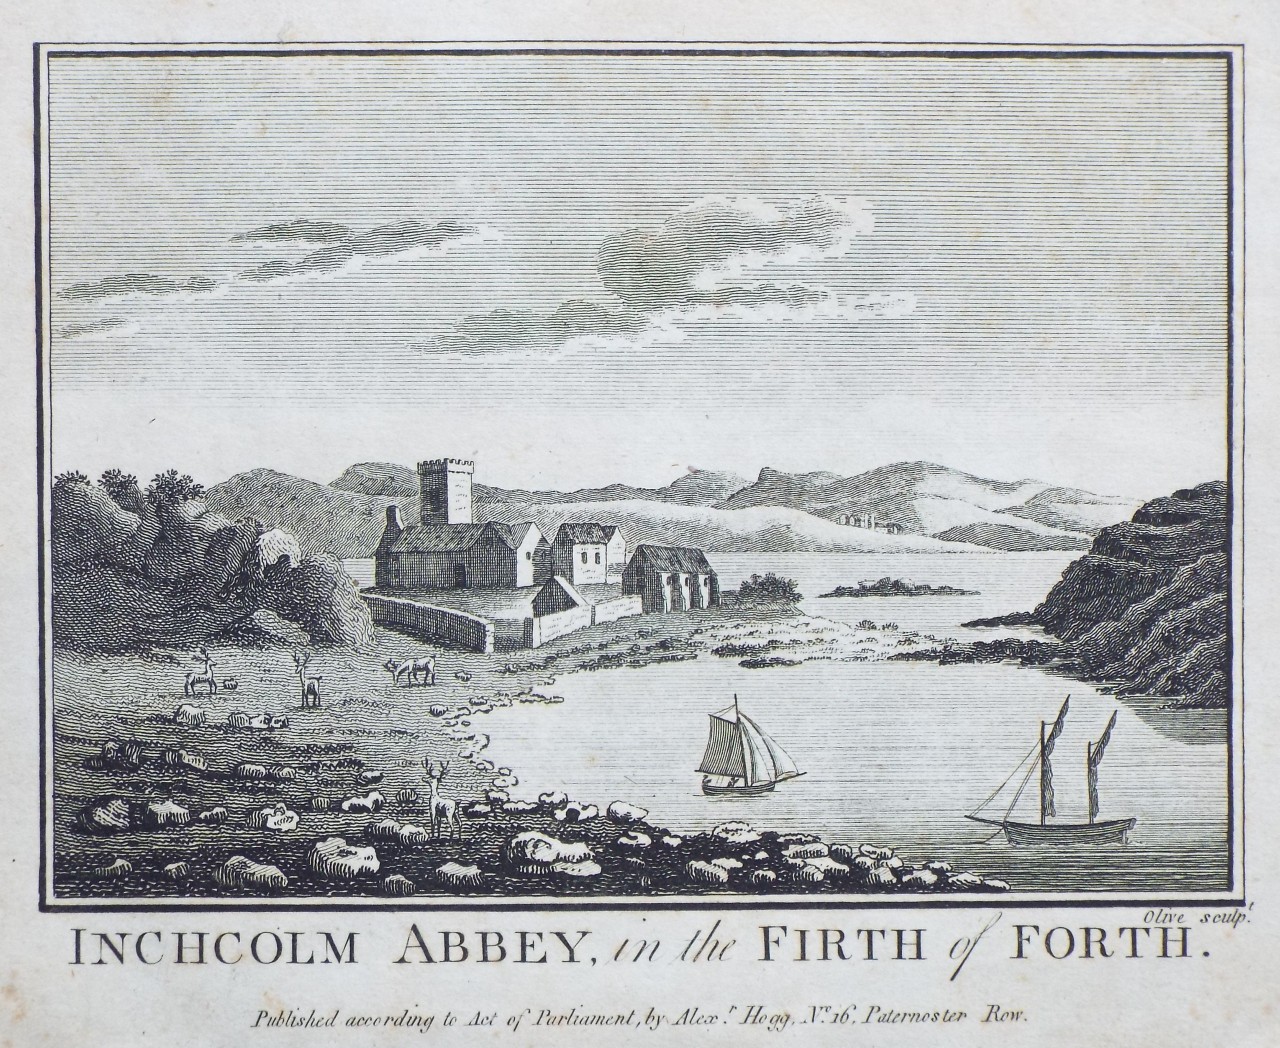 Print - Inchcolm Abbey, in the Firth of Forth. - 